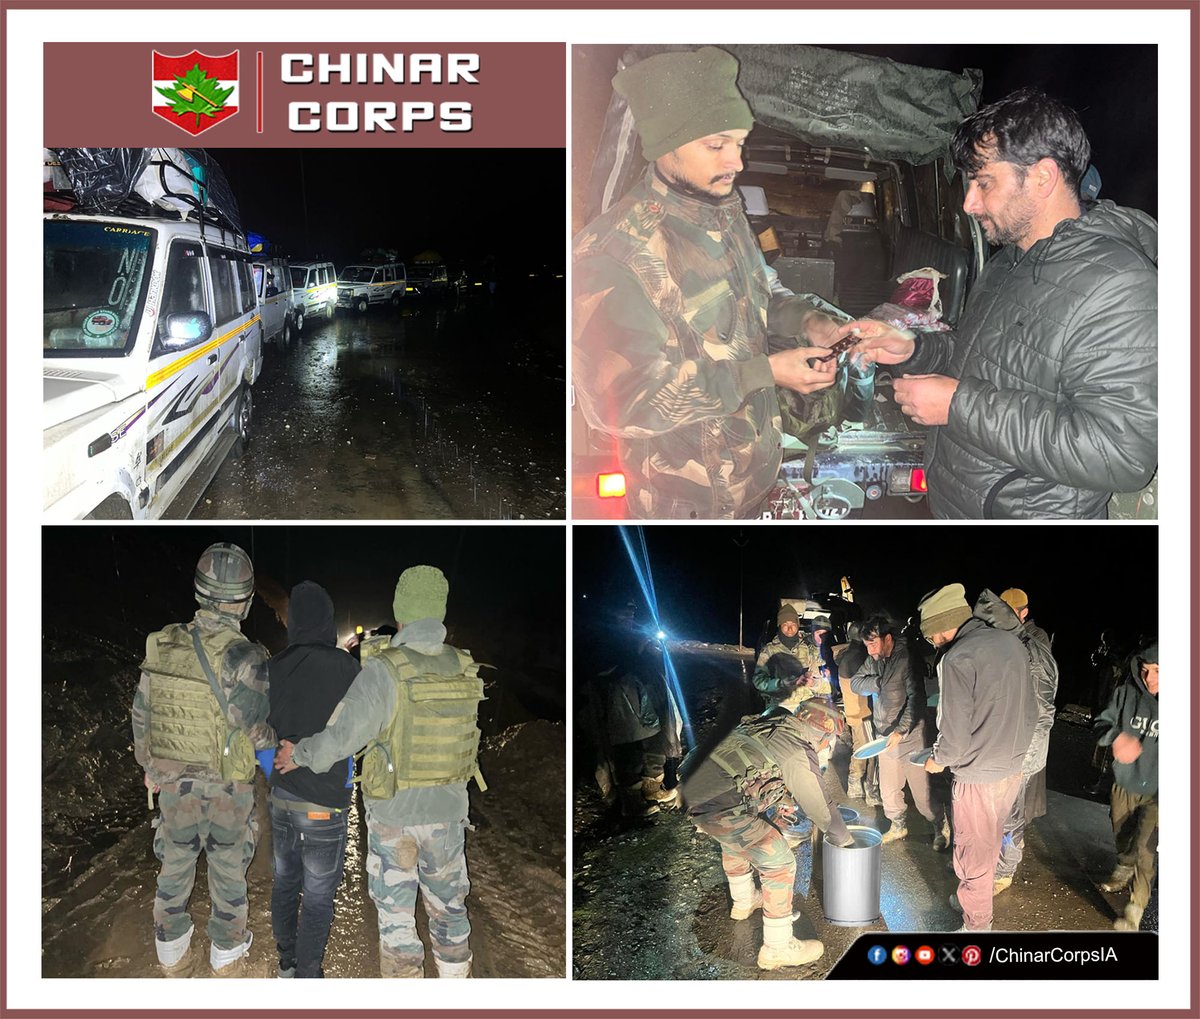 #ChinarWarriors to the rescue'  

Chinar Warriors in conjunction with @BROindia responded to a destress call by stranded civilians due to sudden landslides near Badogam in #Gurez, providing assistance in evacuation of approx 250 civilians including elderly, women & children along